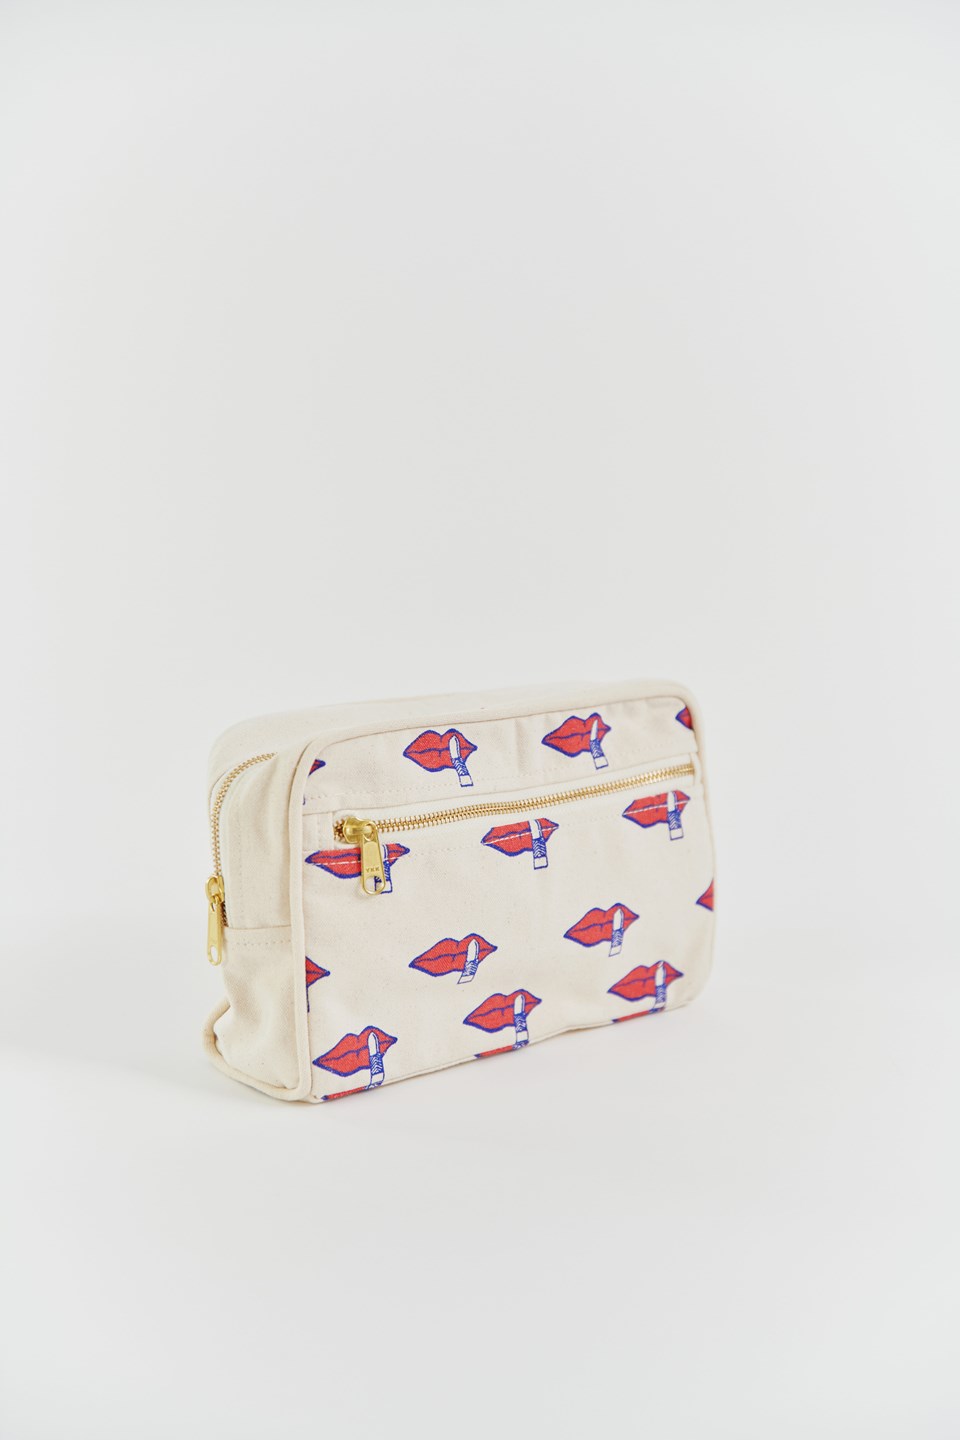 Holly Golightly Toiletry Bag